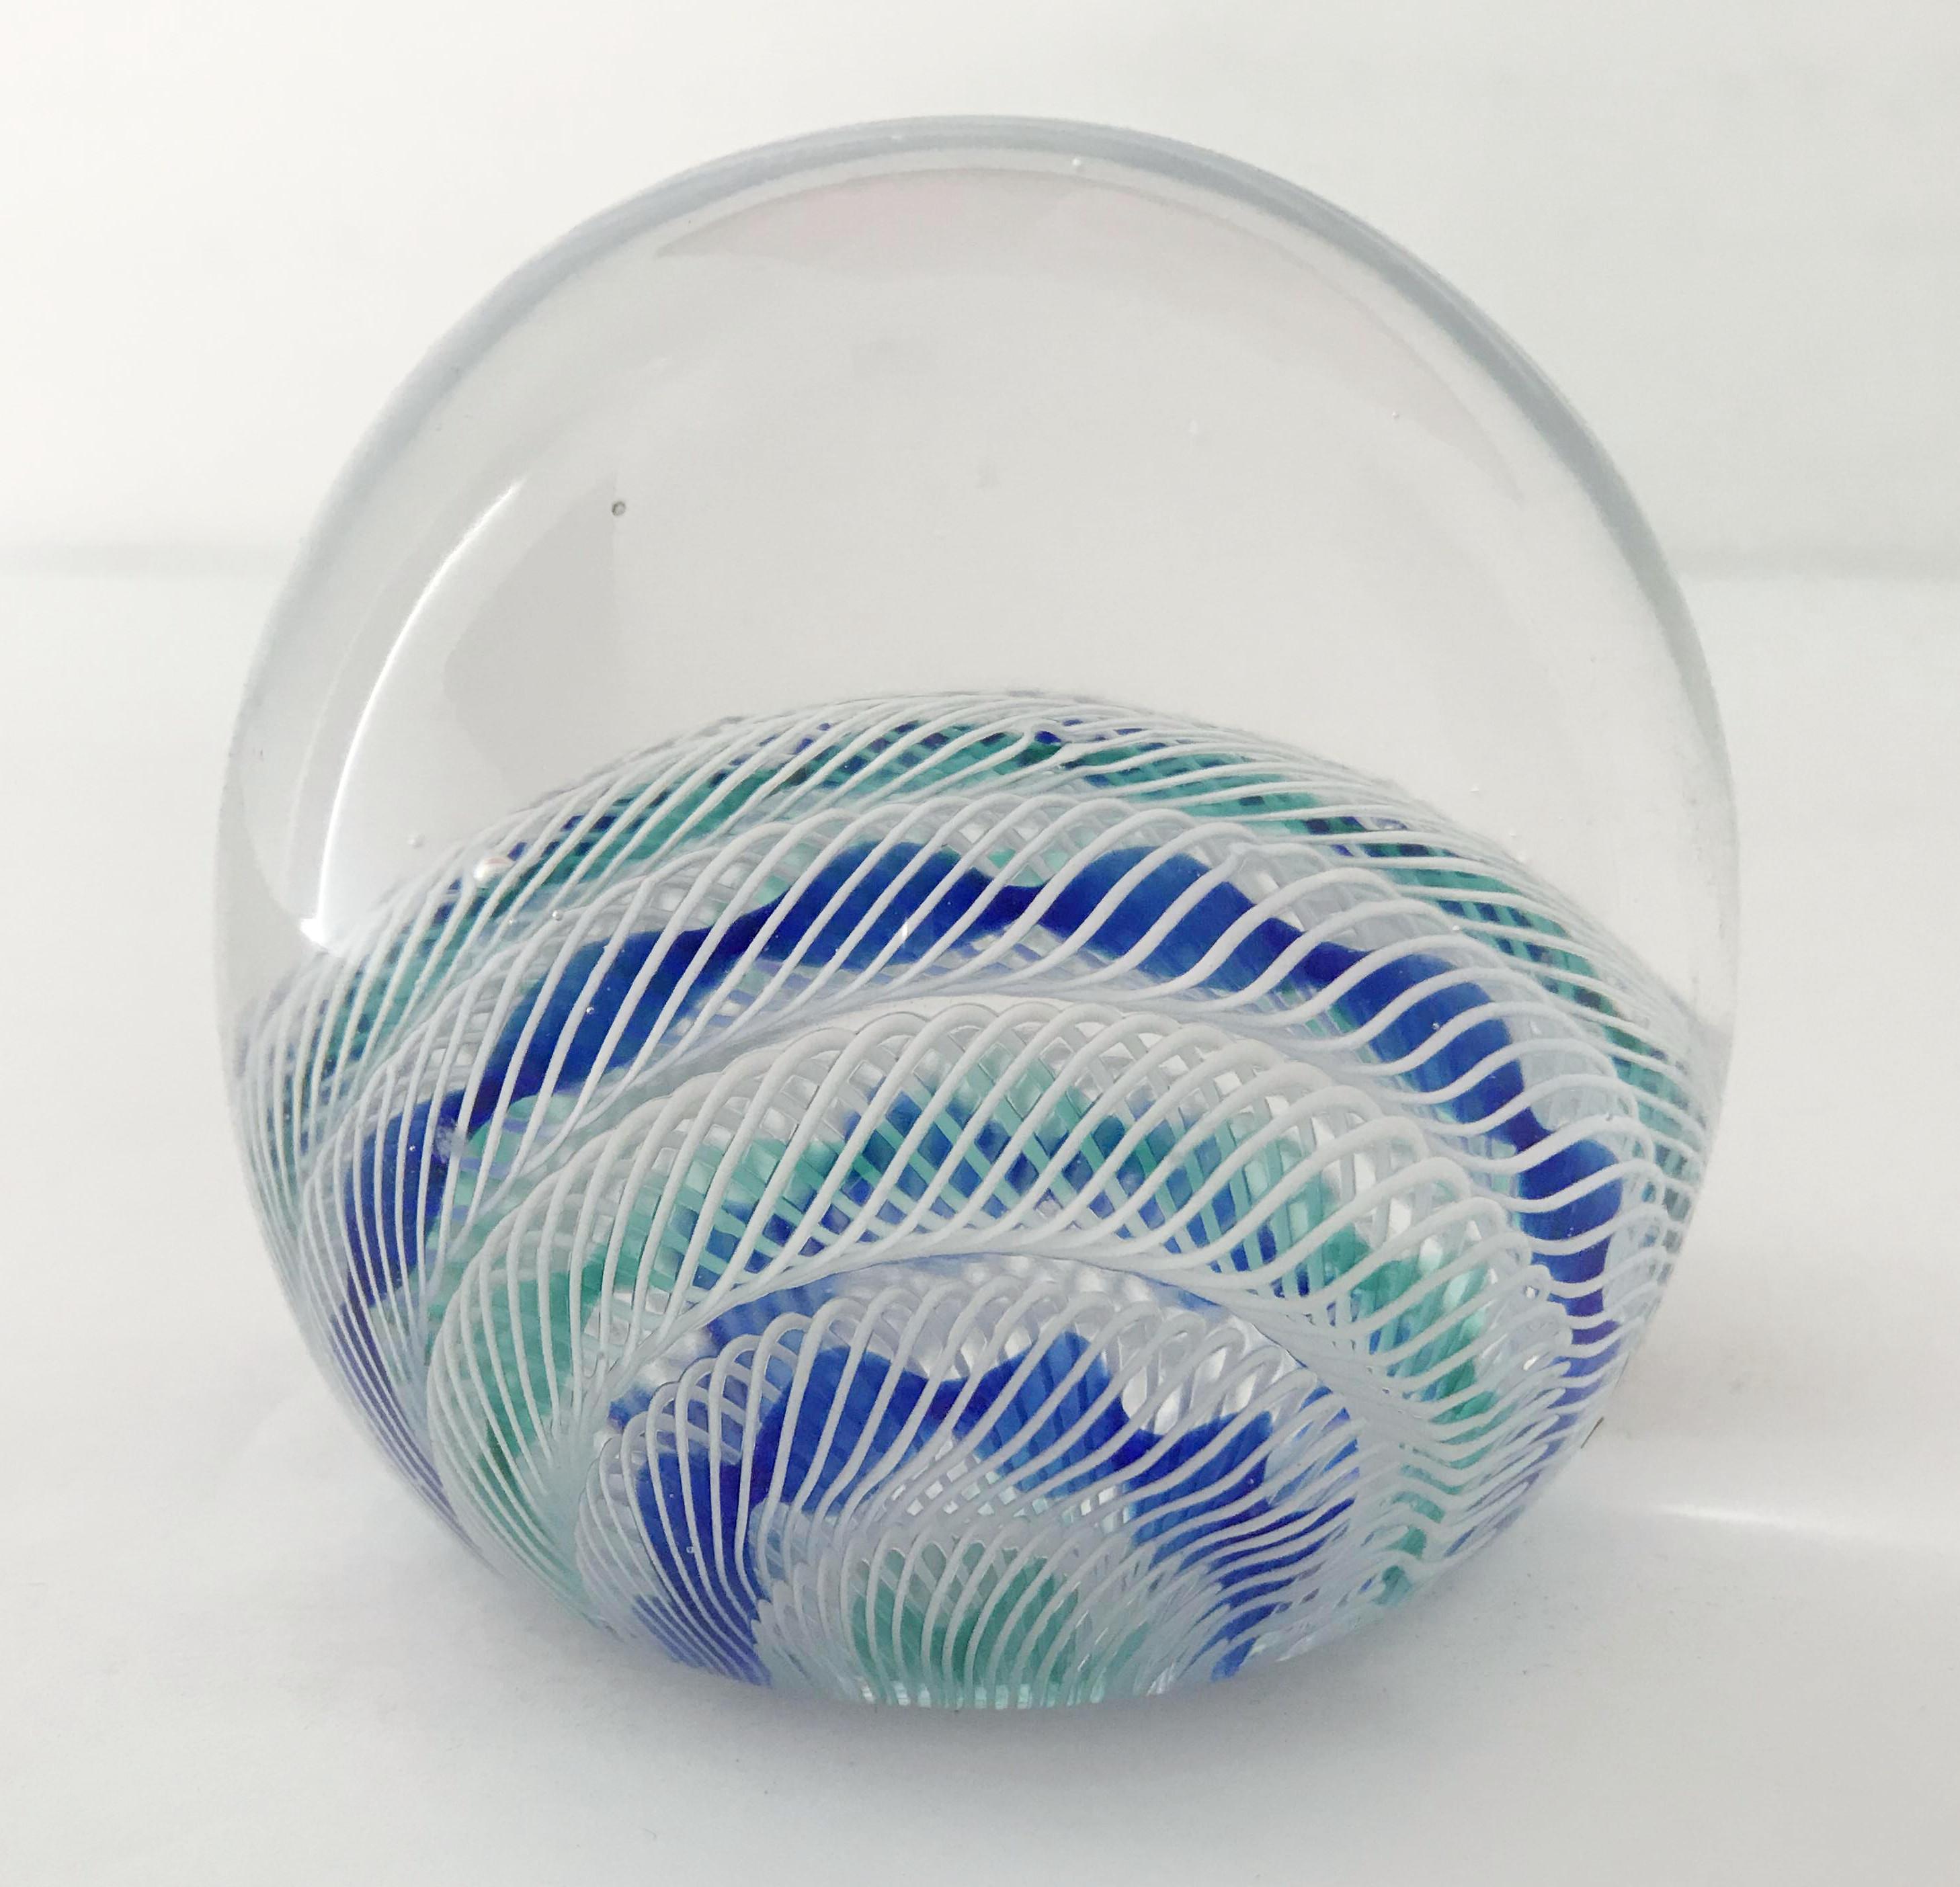 Vintage Italian Murano glass paperweight hand blown with intricate white, light blue, and dark blue ribbons / Made in Italy, circa 1960s
Original sticker on the base
Measures: diameter 3 inches, height 2.75 inches
1 in stock in Palm Springs ON 50%